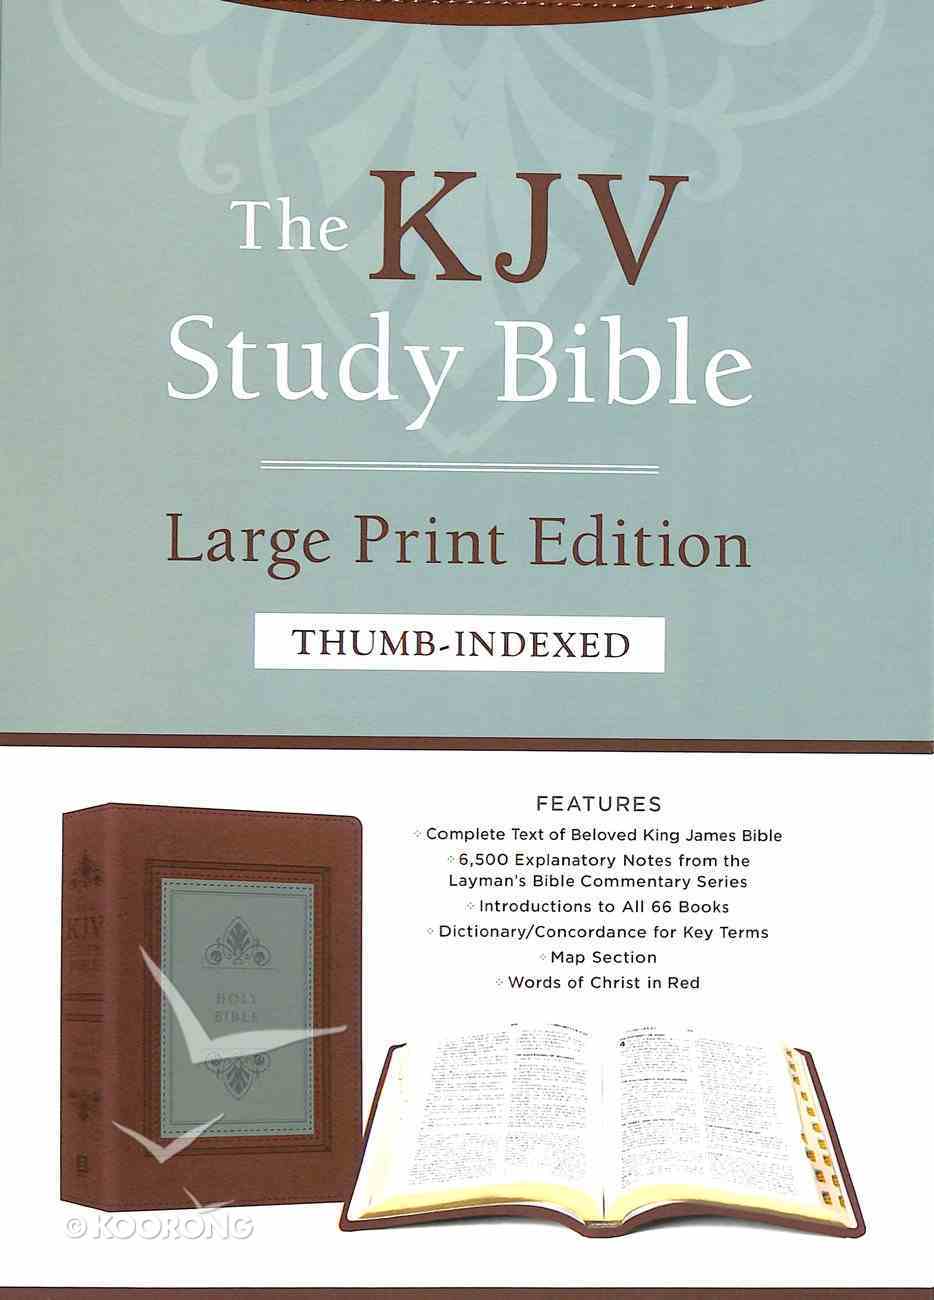 KJV Study Bible Large Print Indexed Teal Inlay (Red Letter Edition) Imitation Leather